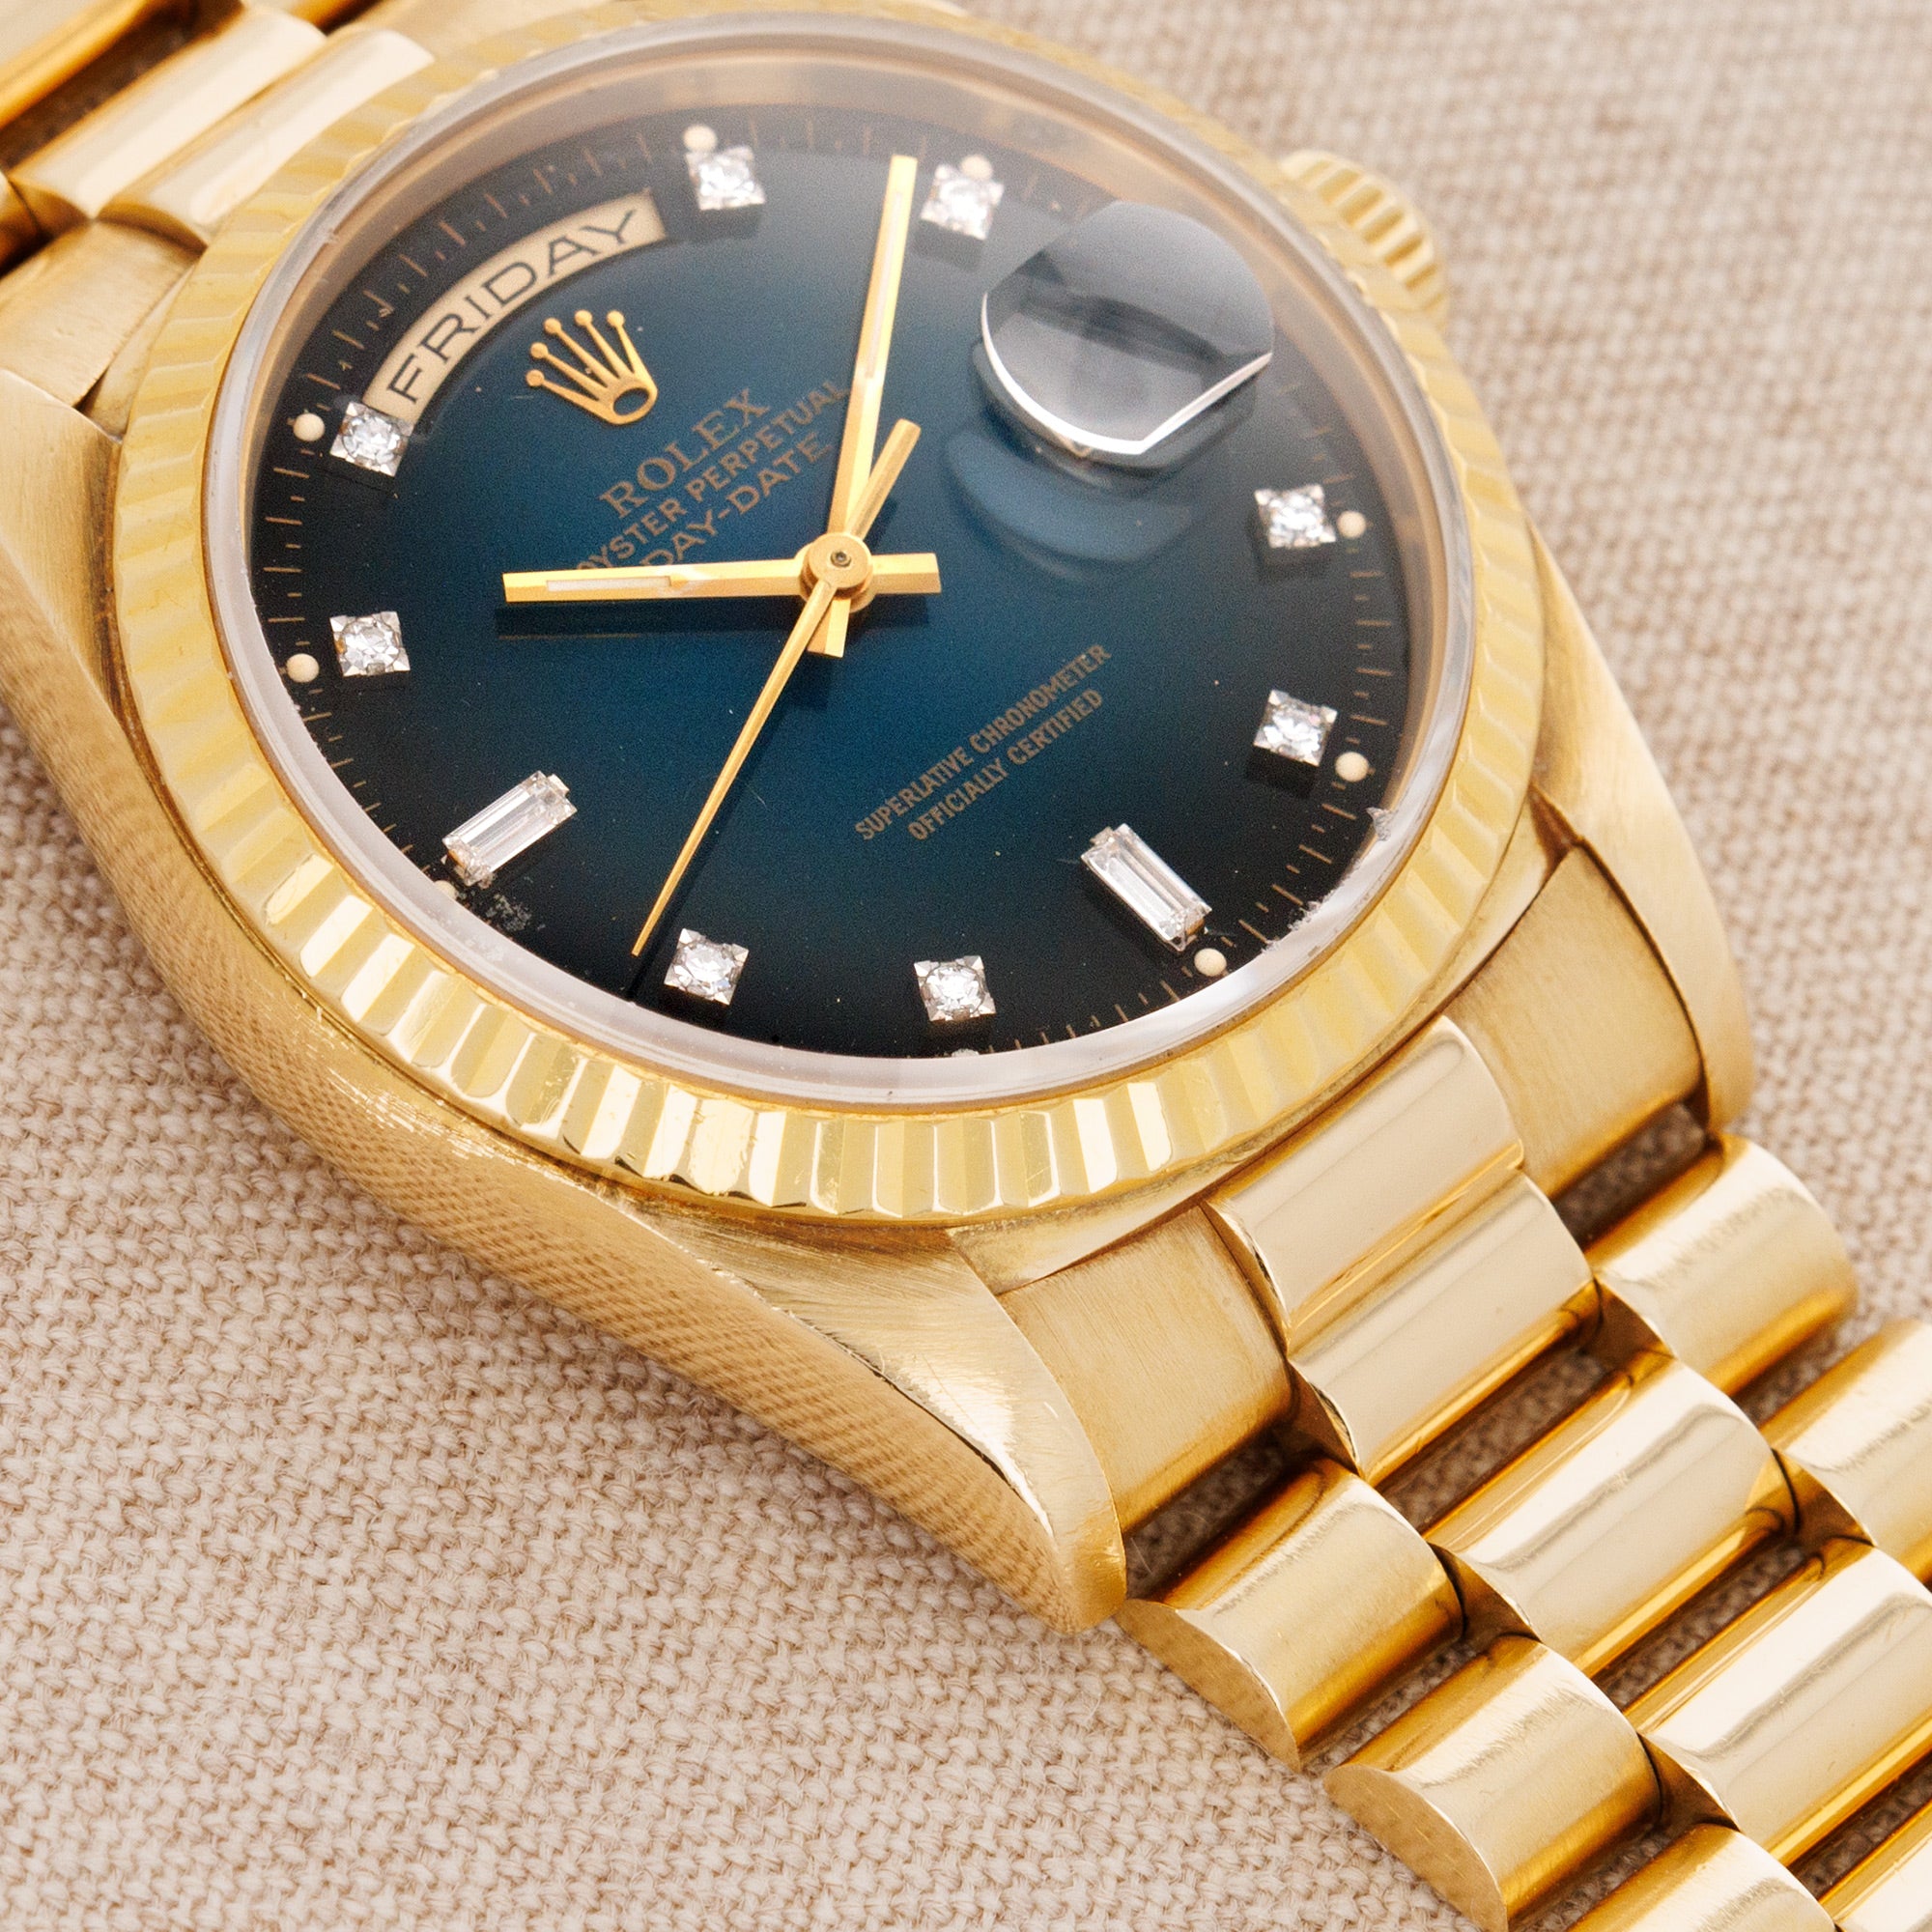 Rolex - Rolex Yellow Gold Day Date Ref. 18238 with Blue Vignette Dial - The Keystone Watches